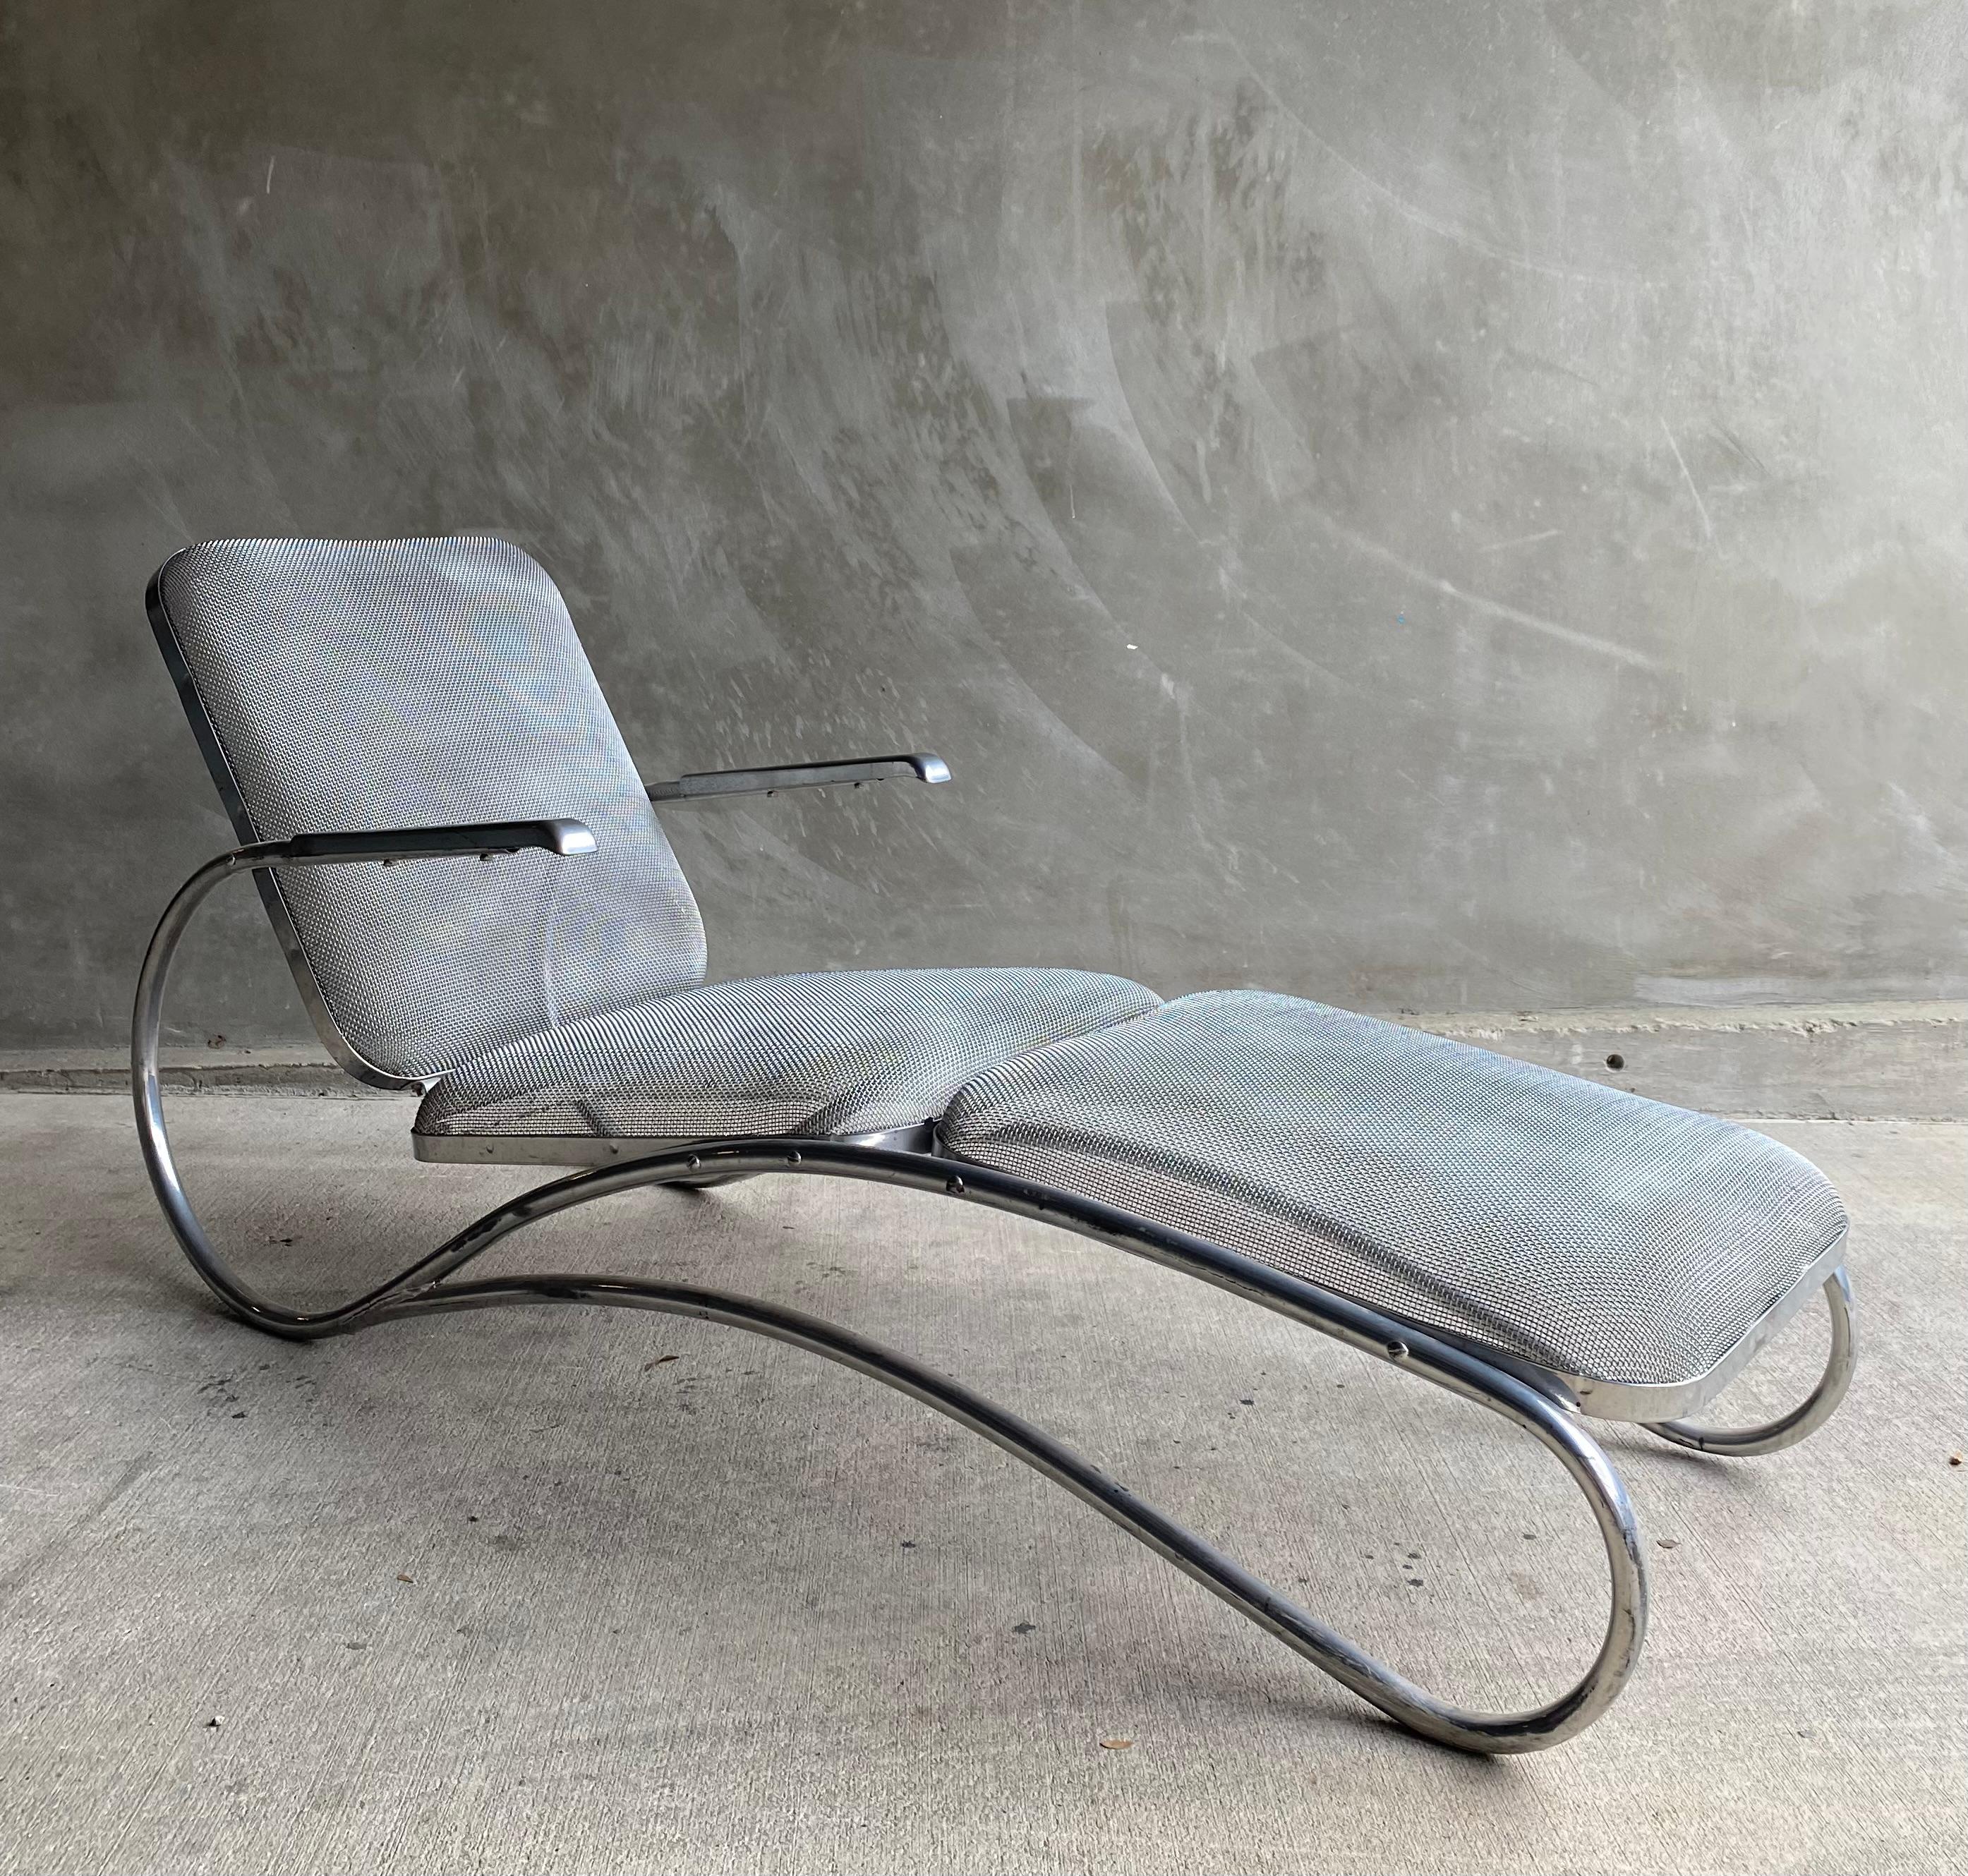 Streamlined era tubular frame chaise lounge with wire seating surface in a nickel plated finish. Sculptural profile tubular frame supports a nonadjustable seat and back in a relaxed position with floating arm supports in warm nickel finish.